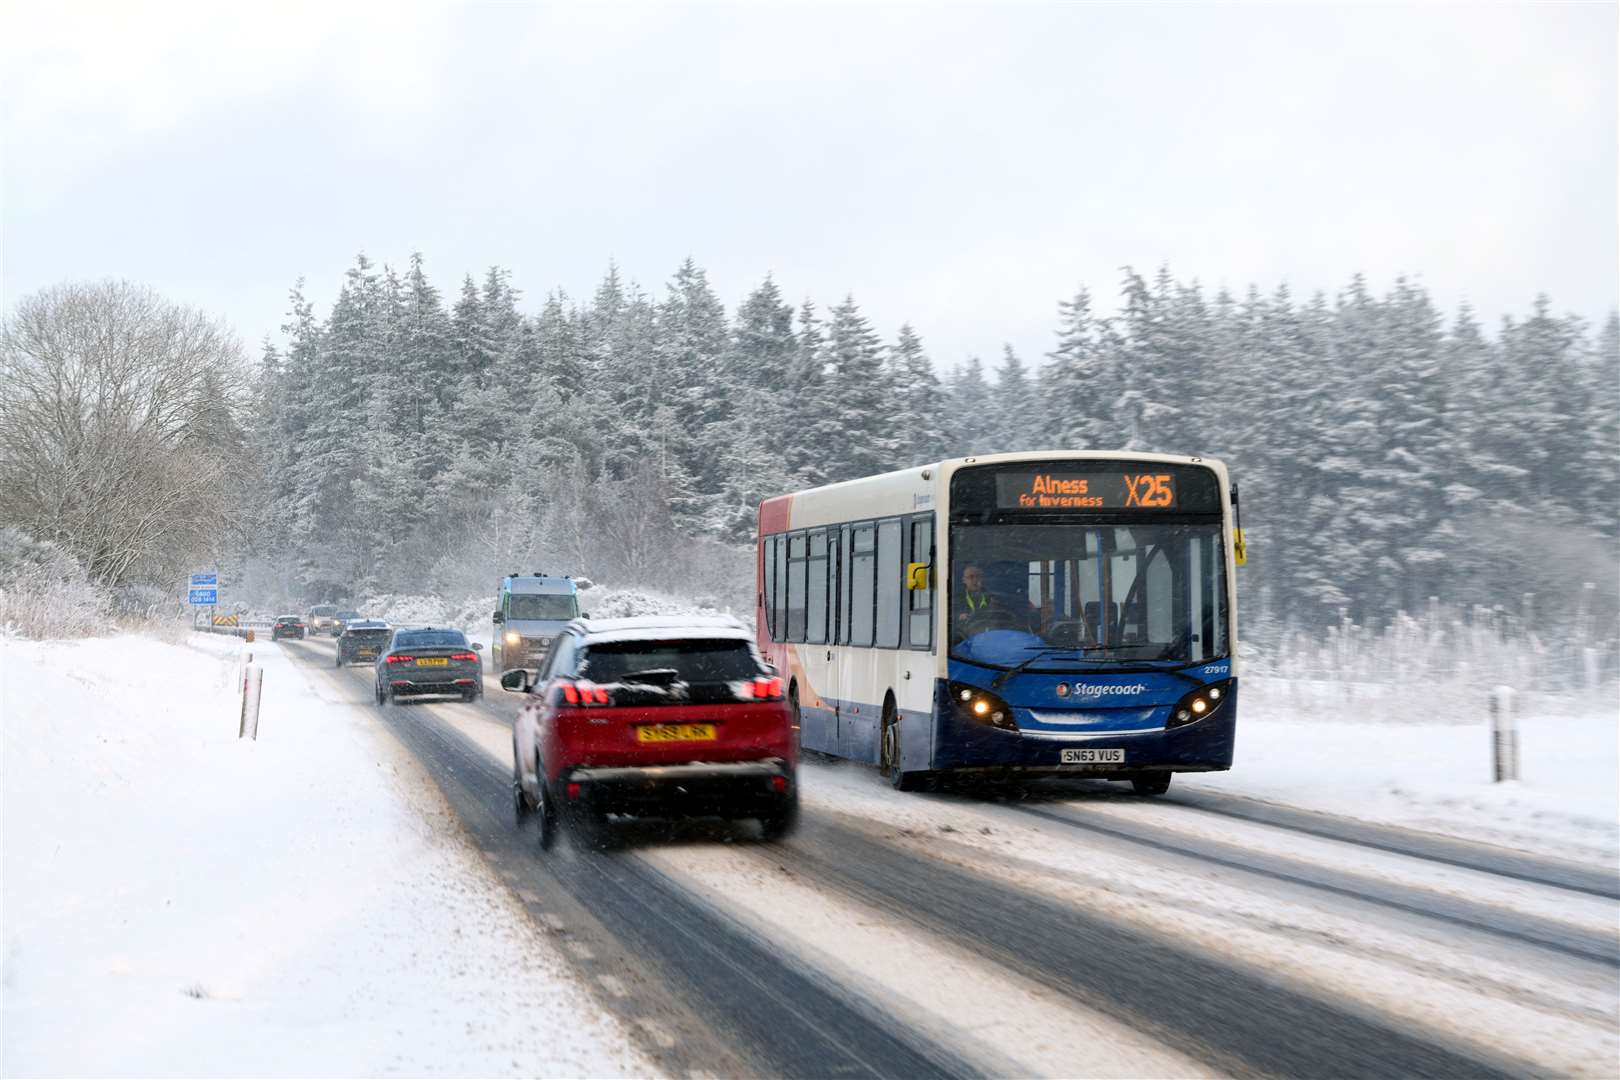 A bus on the A9 in the snow. Picture: James Mackenzie